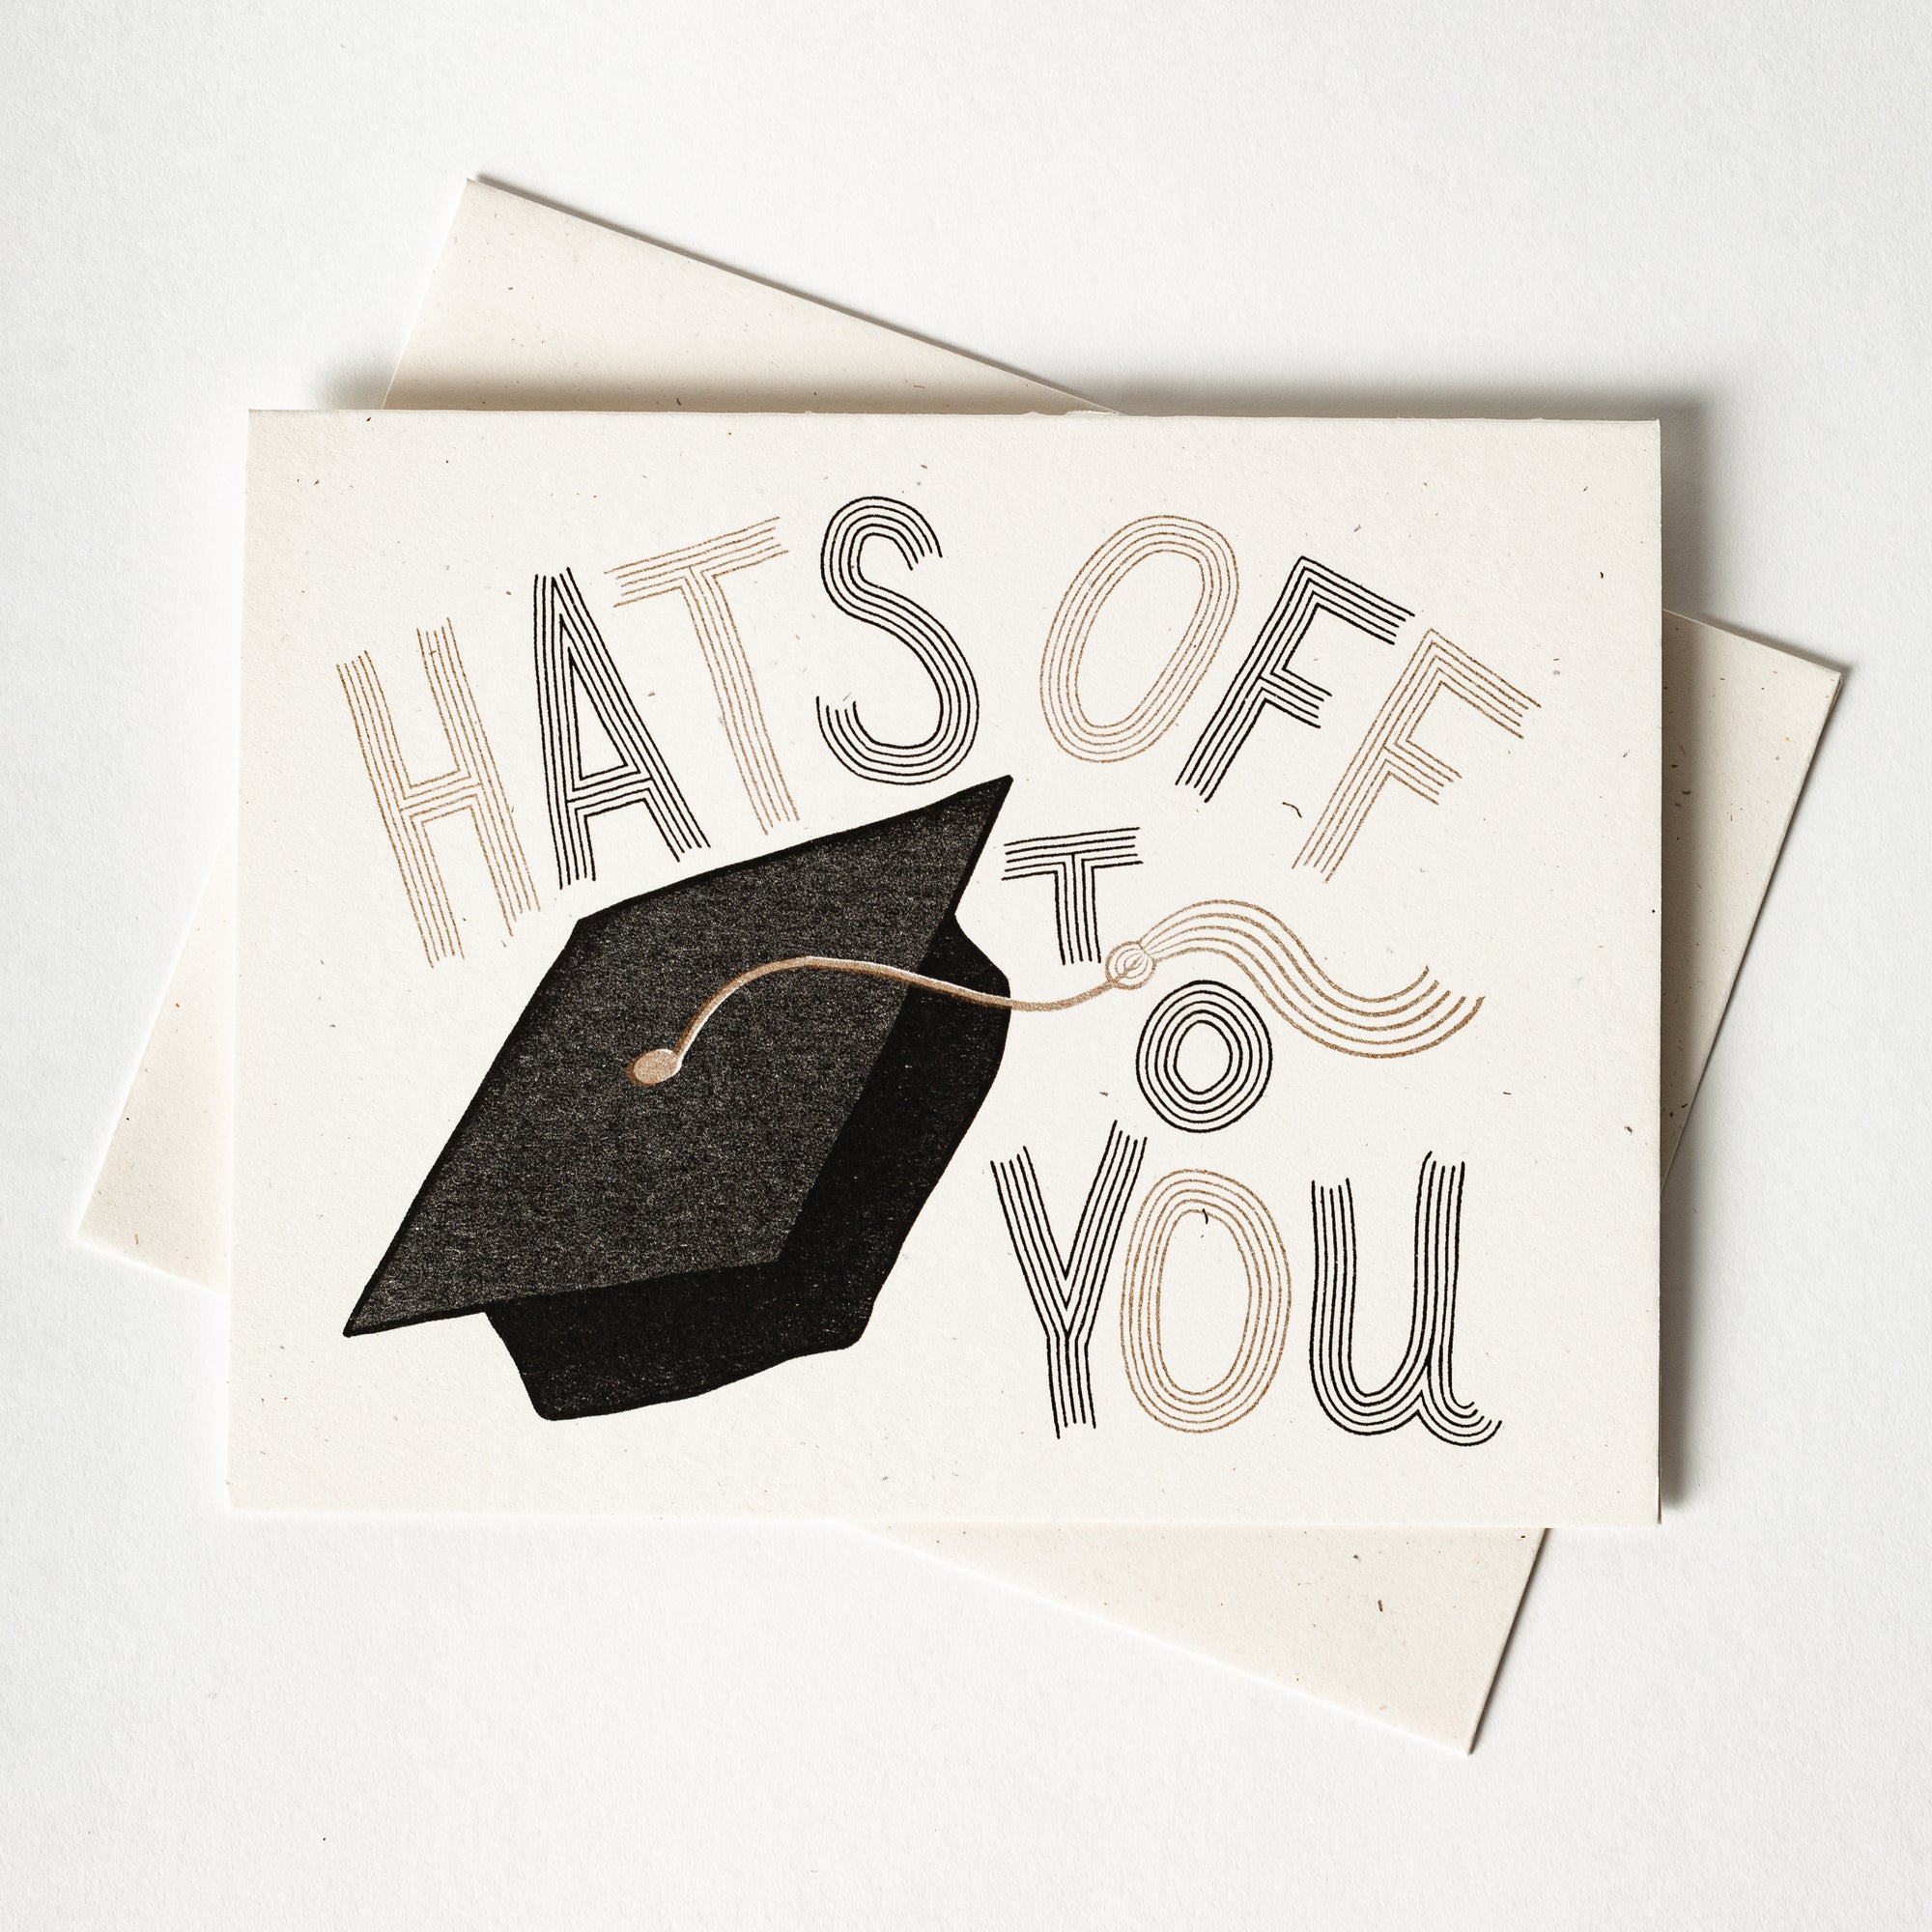 Hats Off To You - Risograph Graduation Card